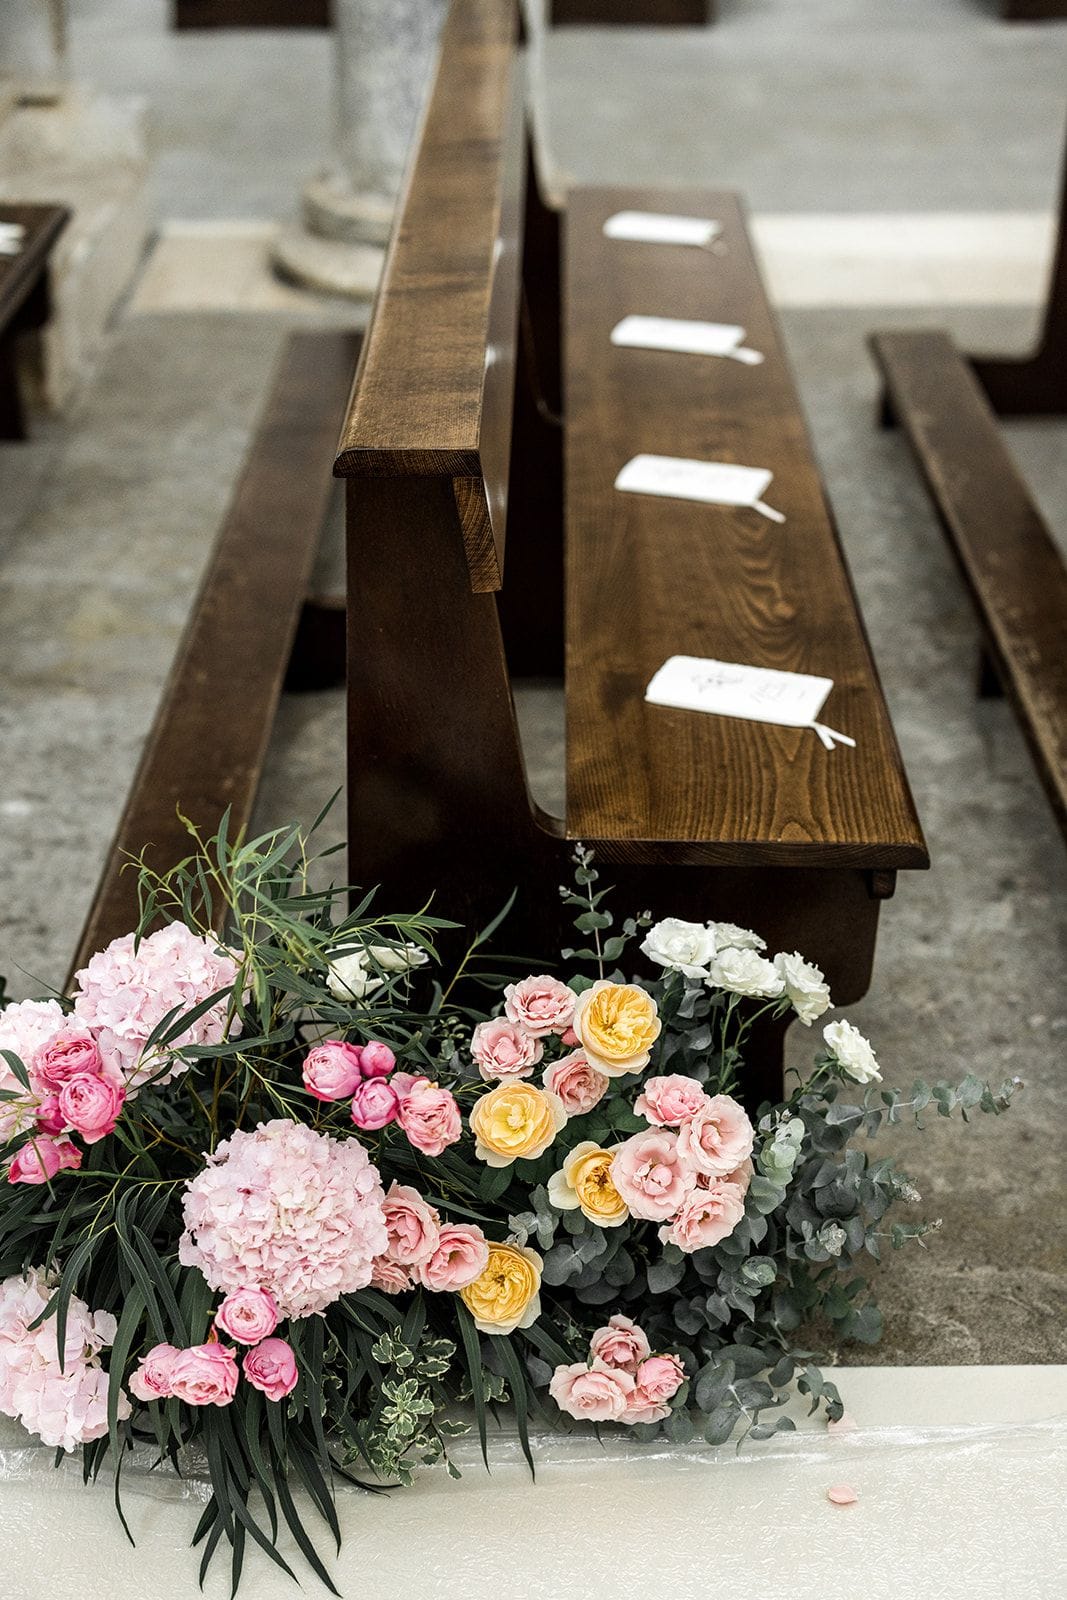 Pink and yellow flowers next to church pew for wedding ceremony